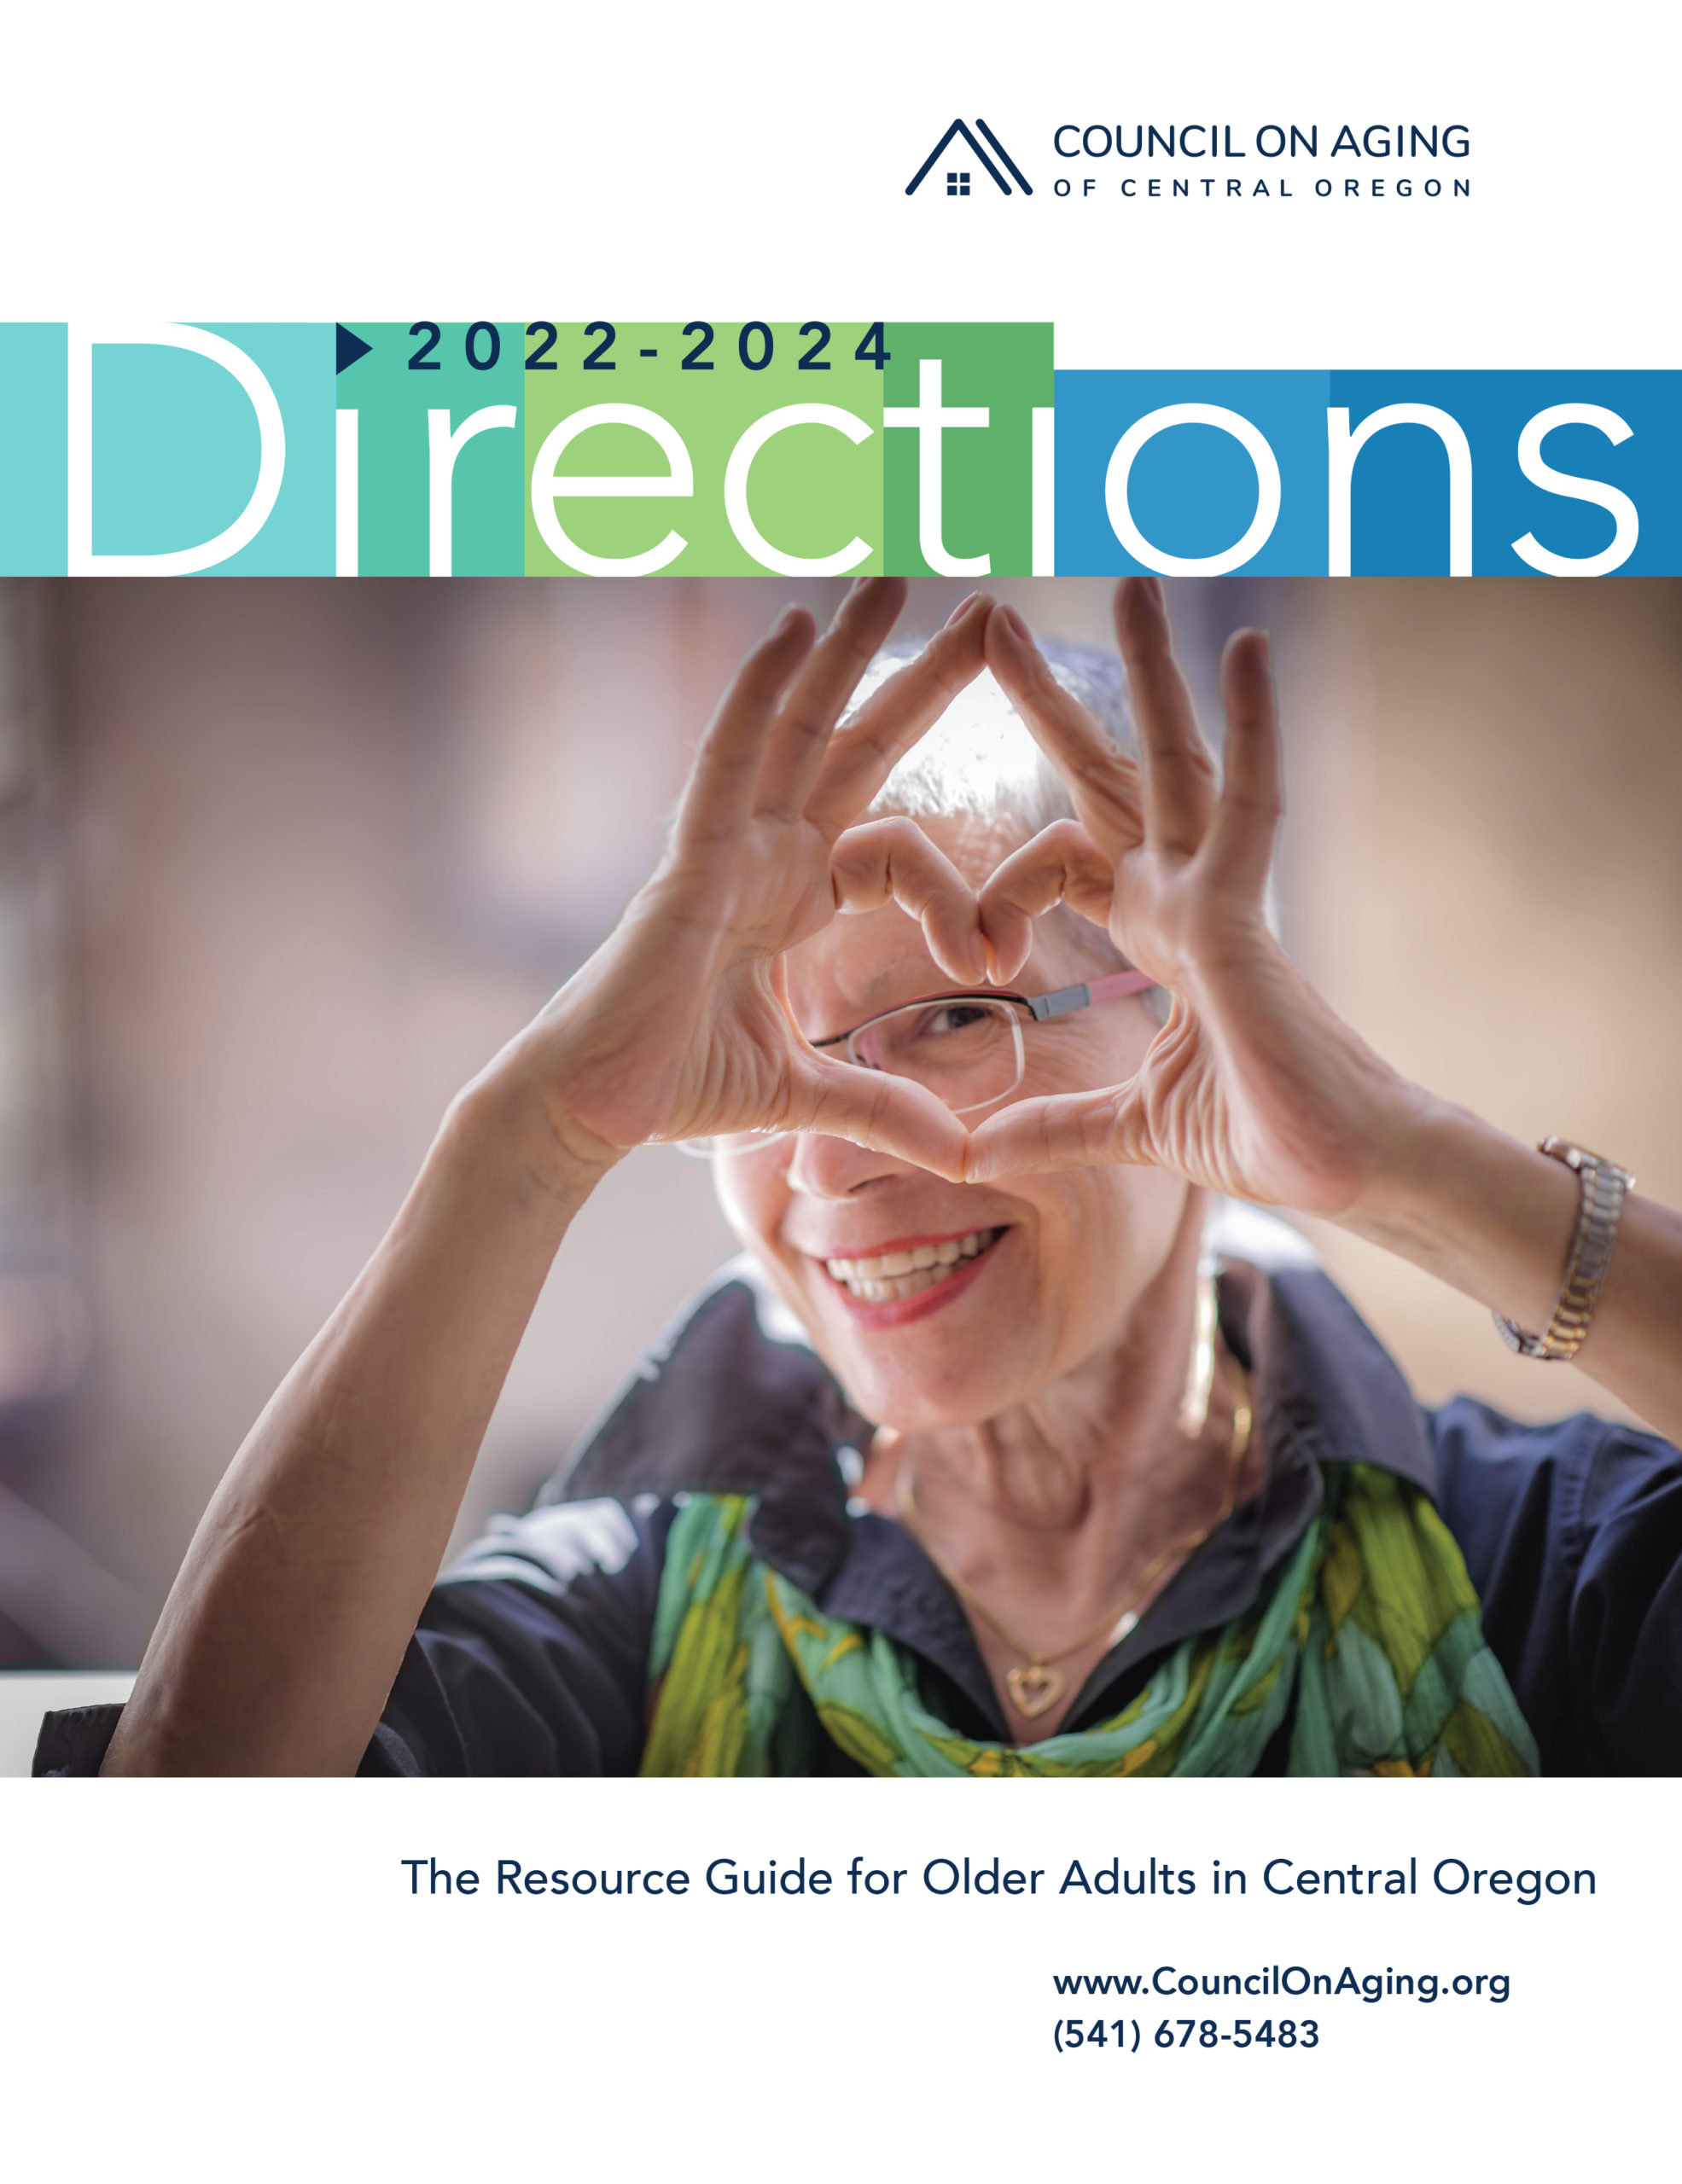 20222024 Directions Council on Aging of Central Oregon